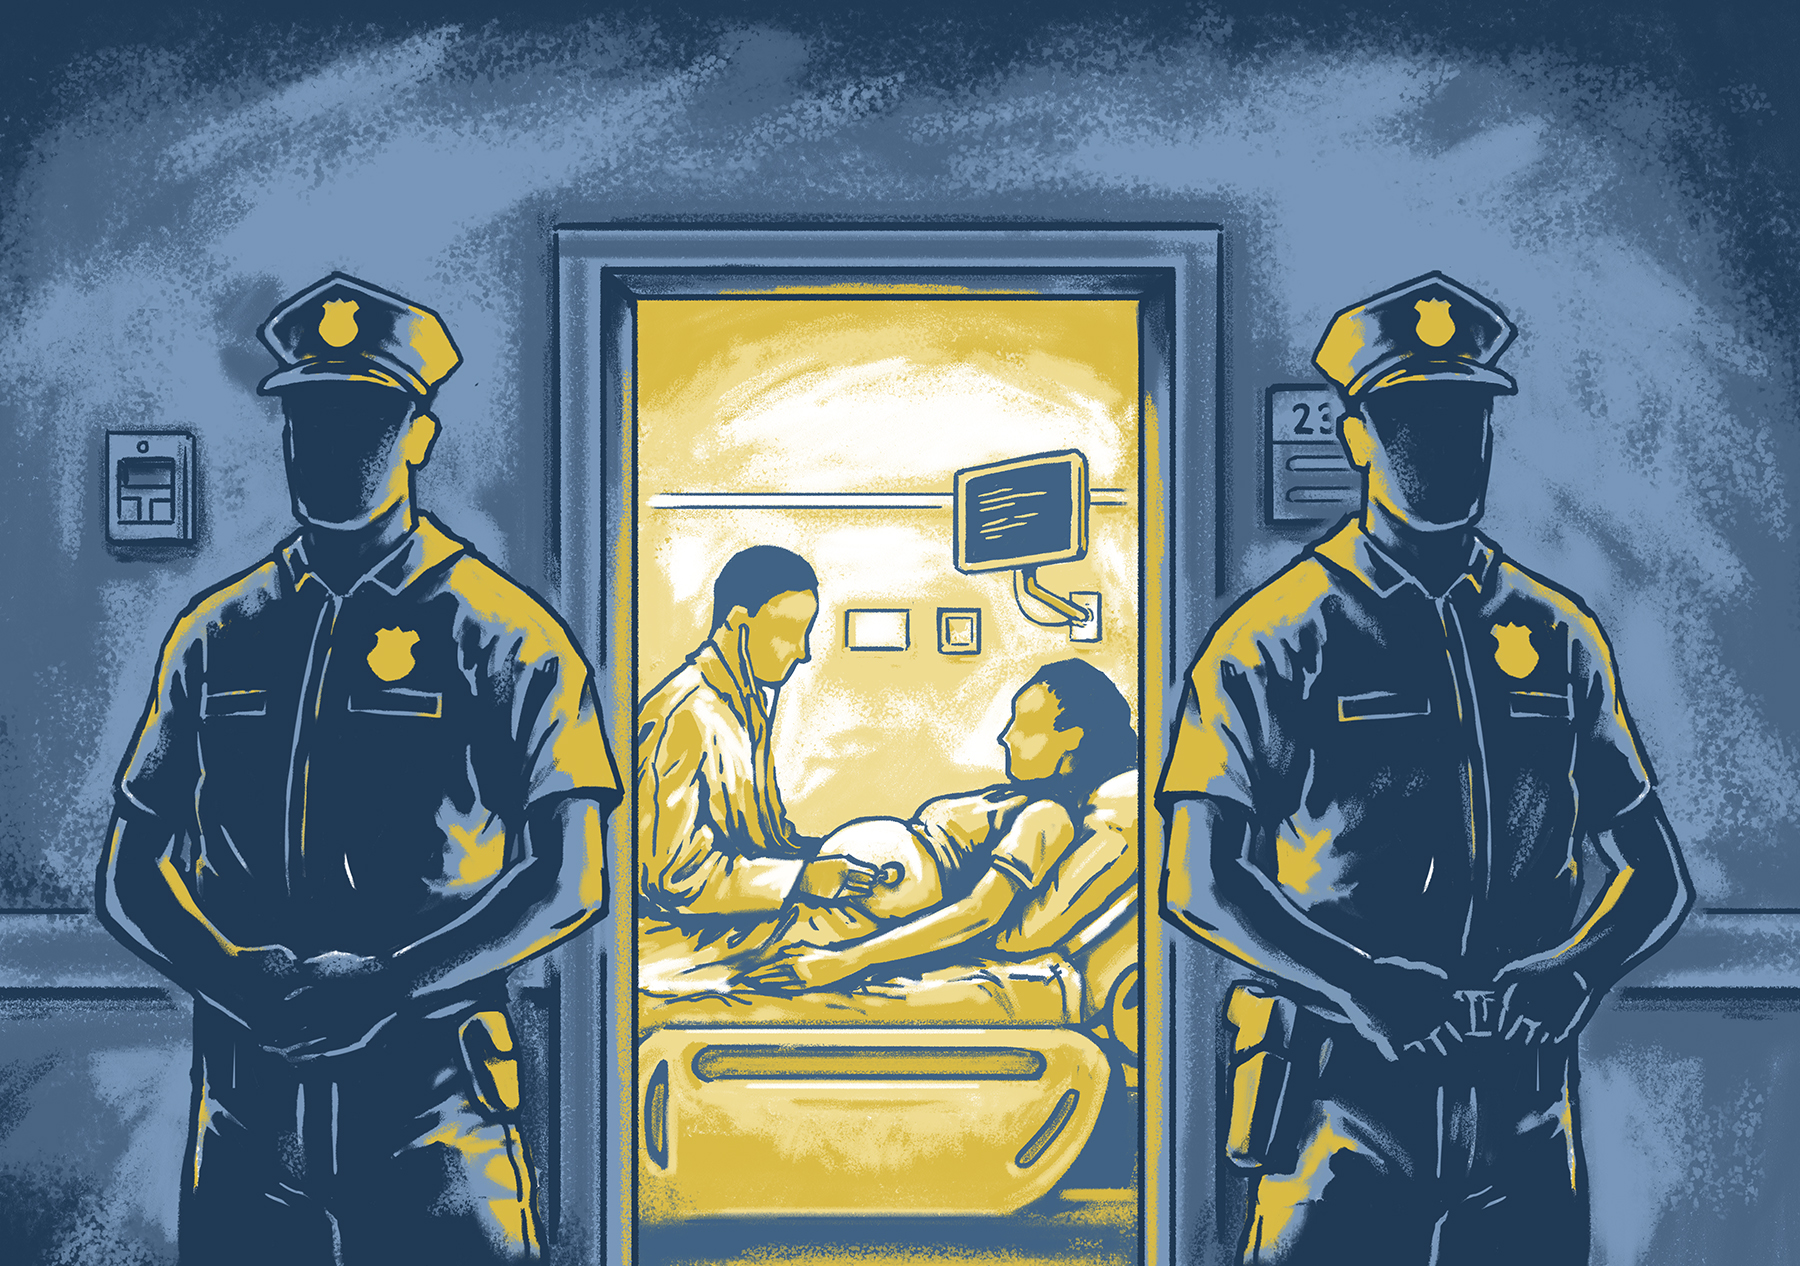 Policing pregnancy: Wisconsin’s ‘fetal protection’ law, one of the nation’s most punitive, forces women into treatment or jail